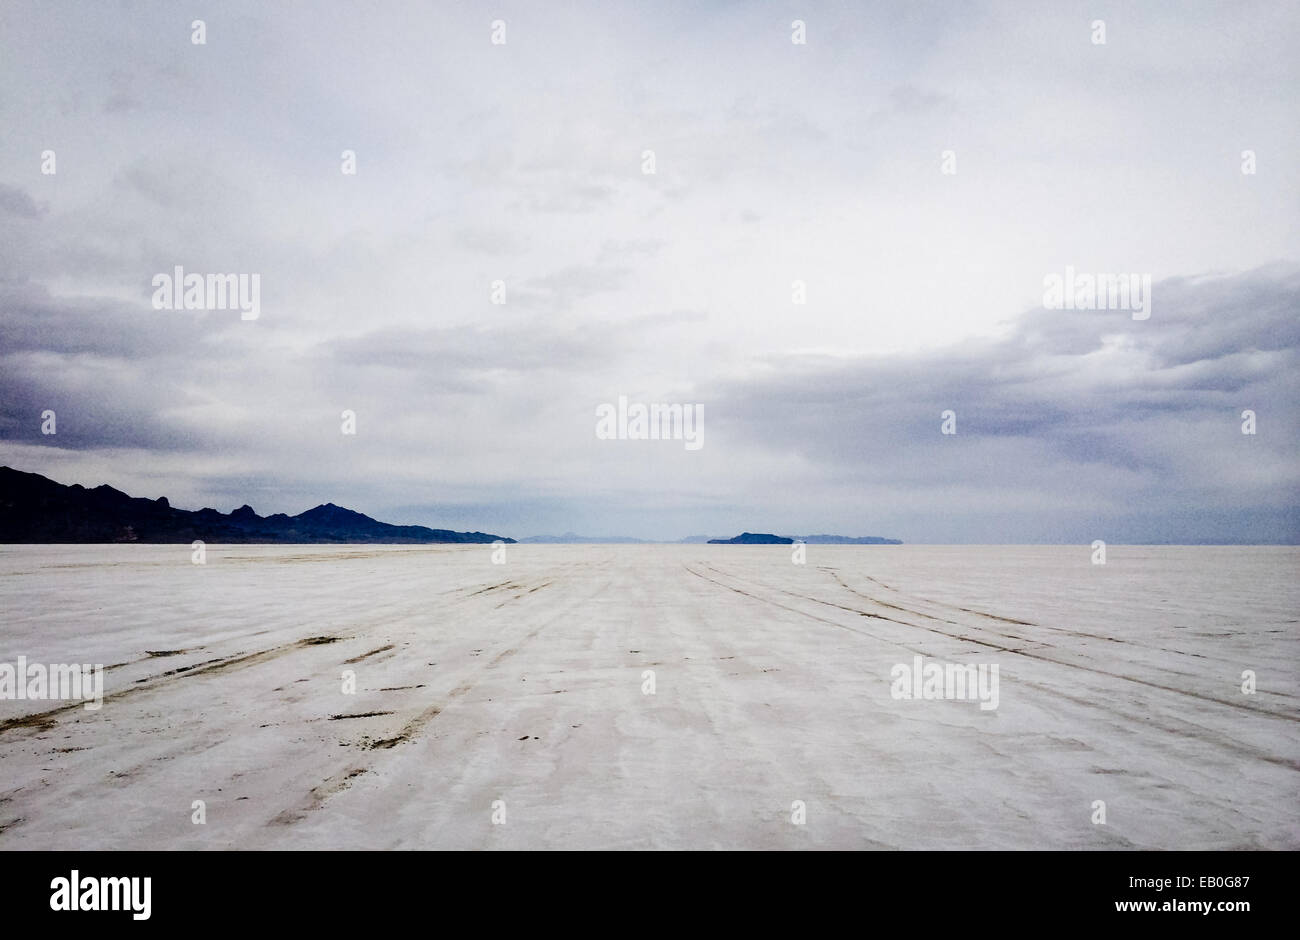 The bonneville salt flats with mountains in the distance cloudy stock photo